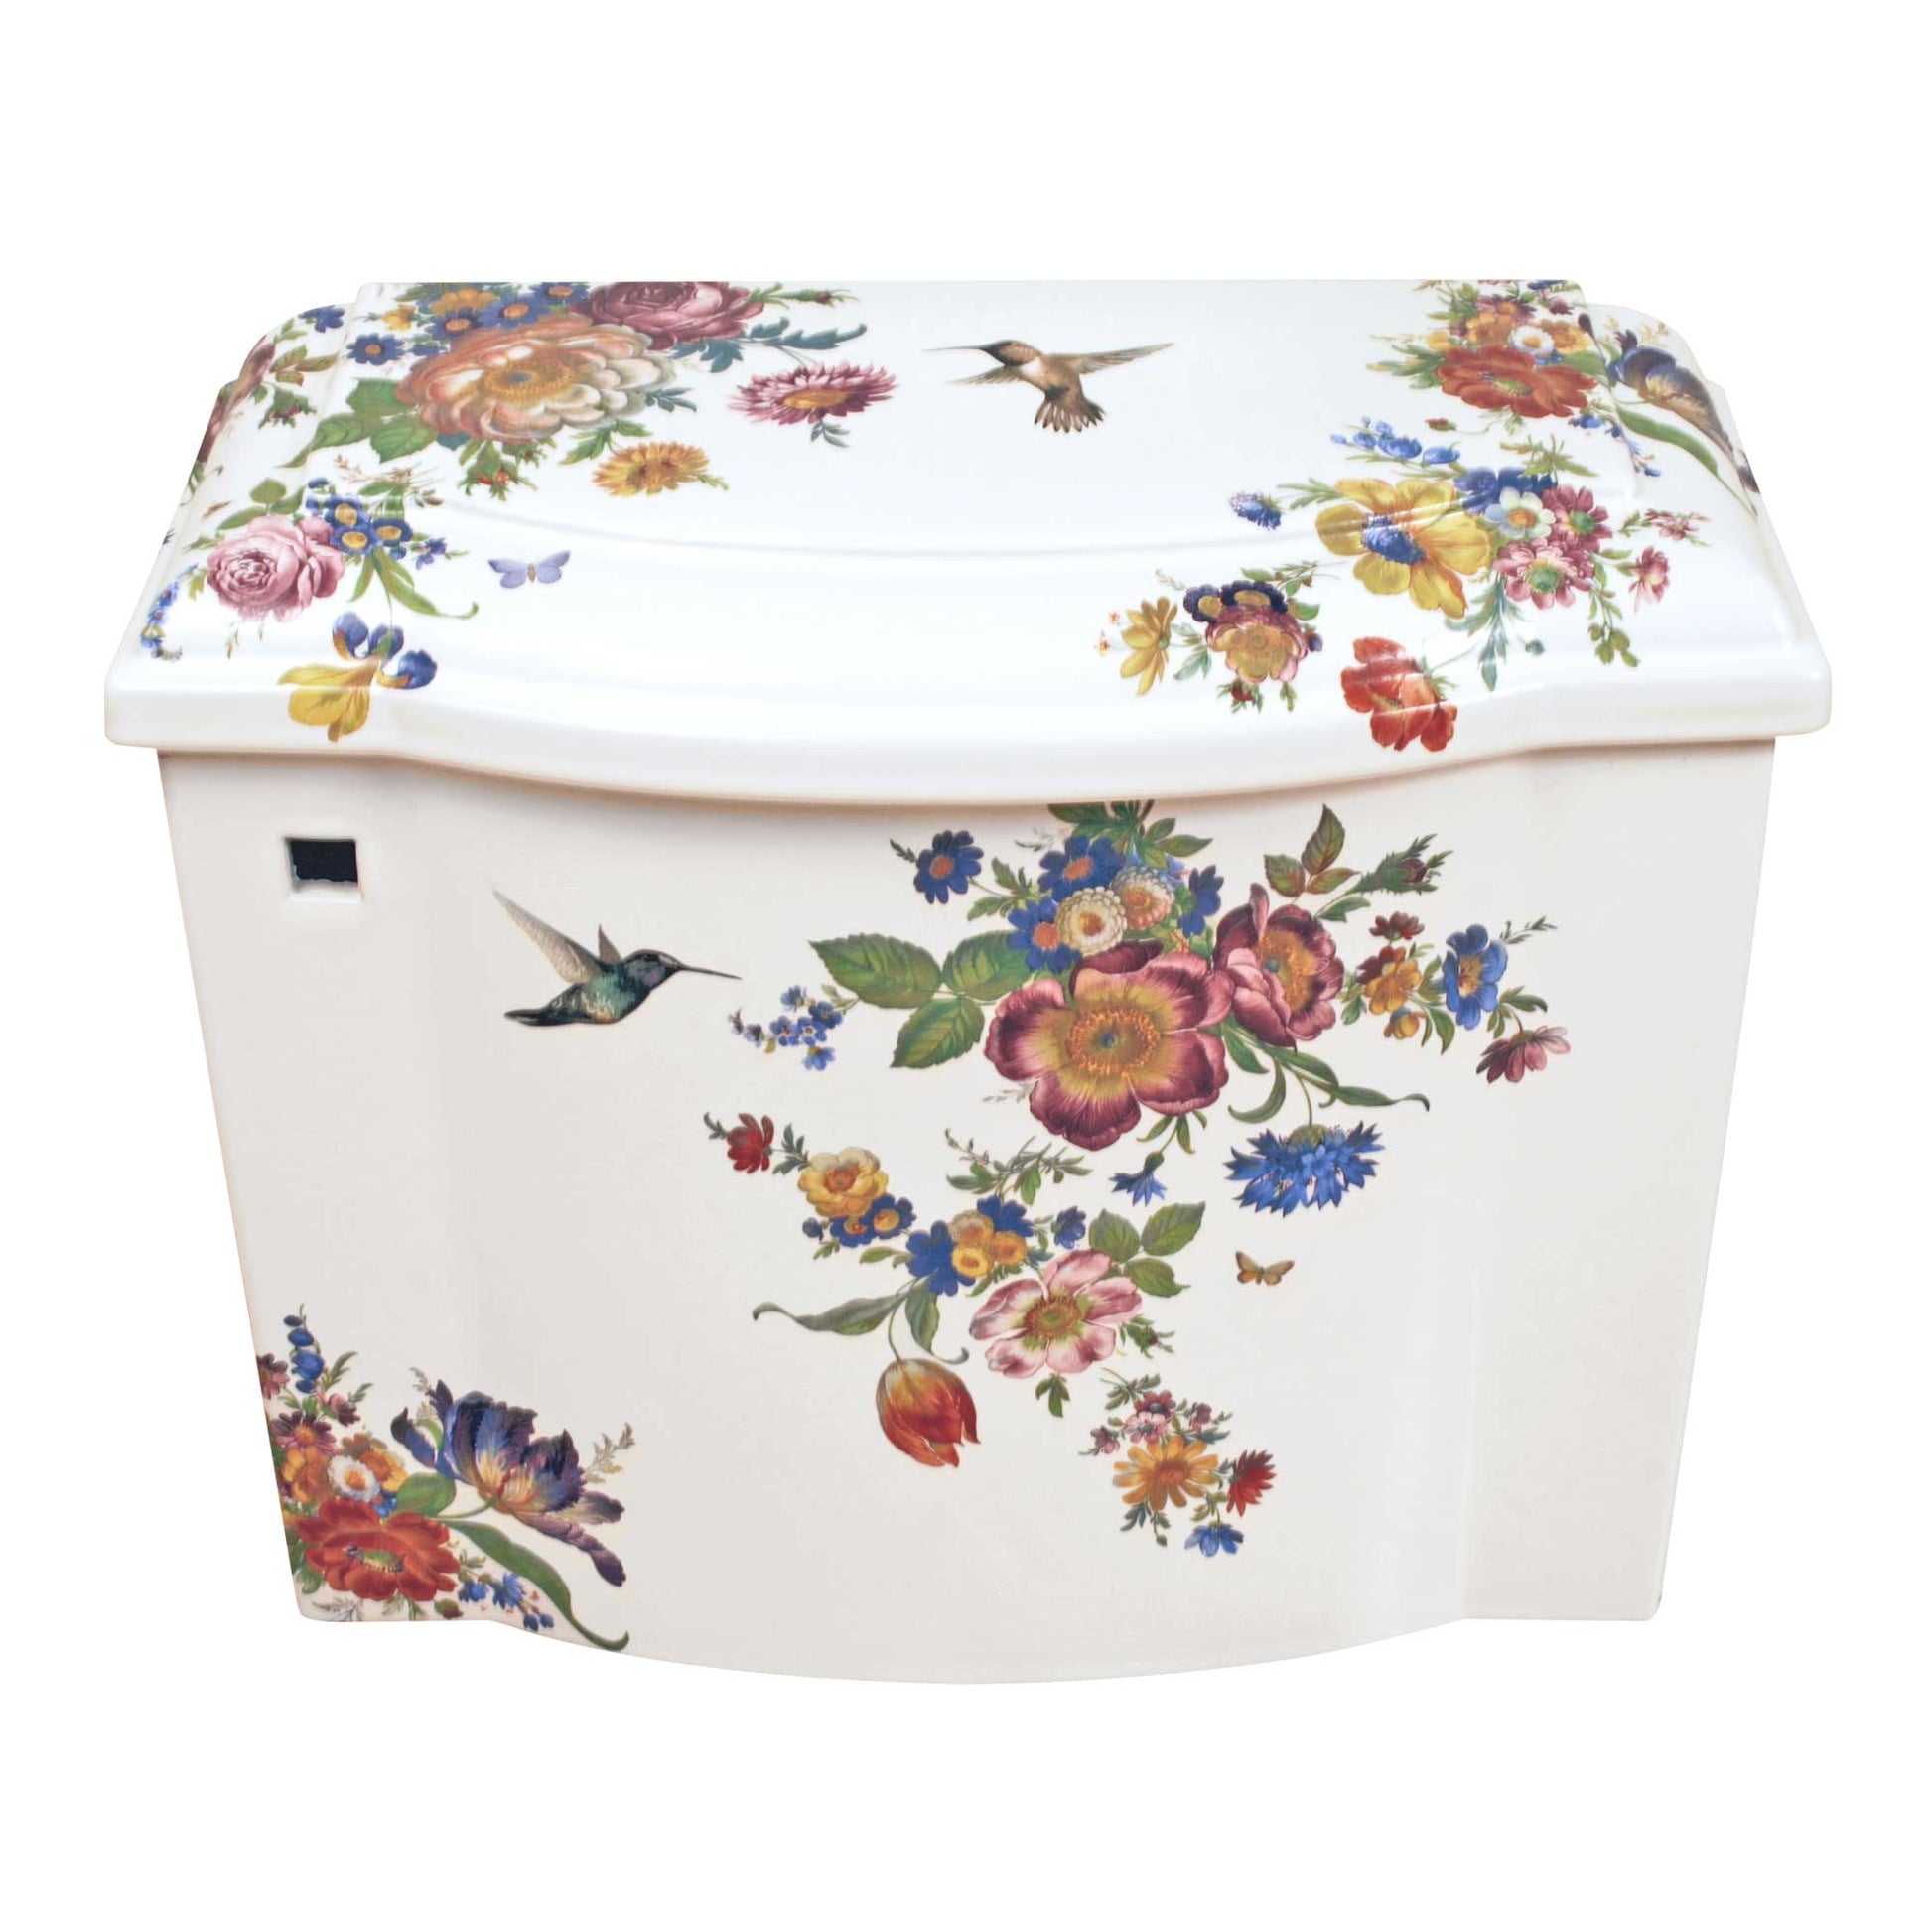 Hand painted Kohler toilet with flowers and hummingbirds